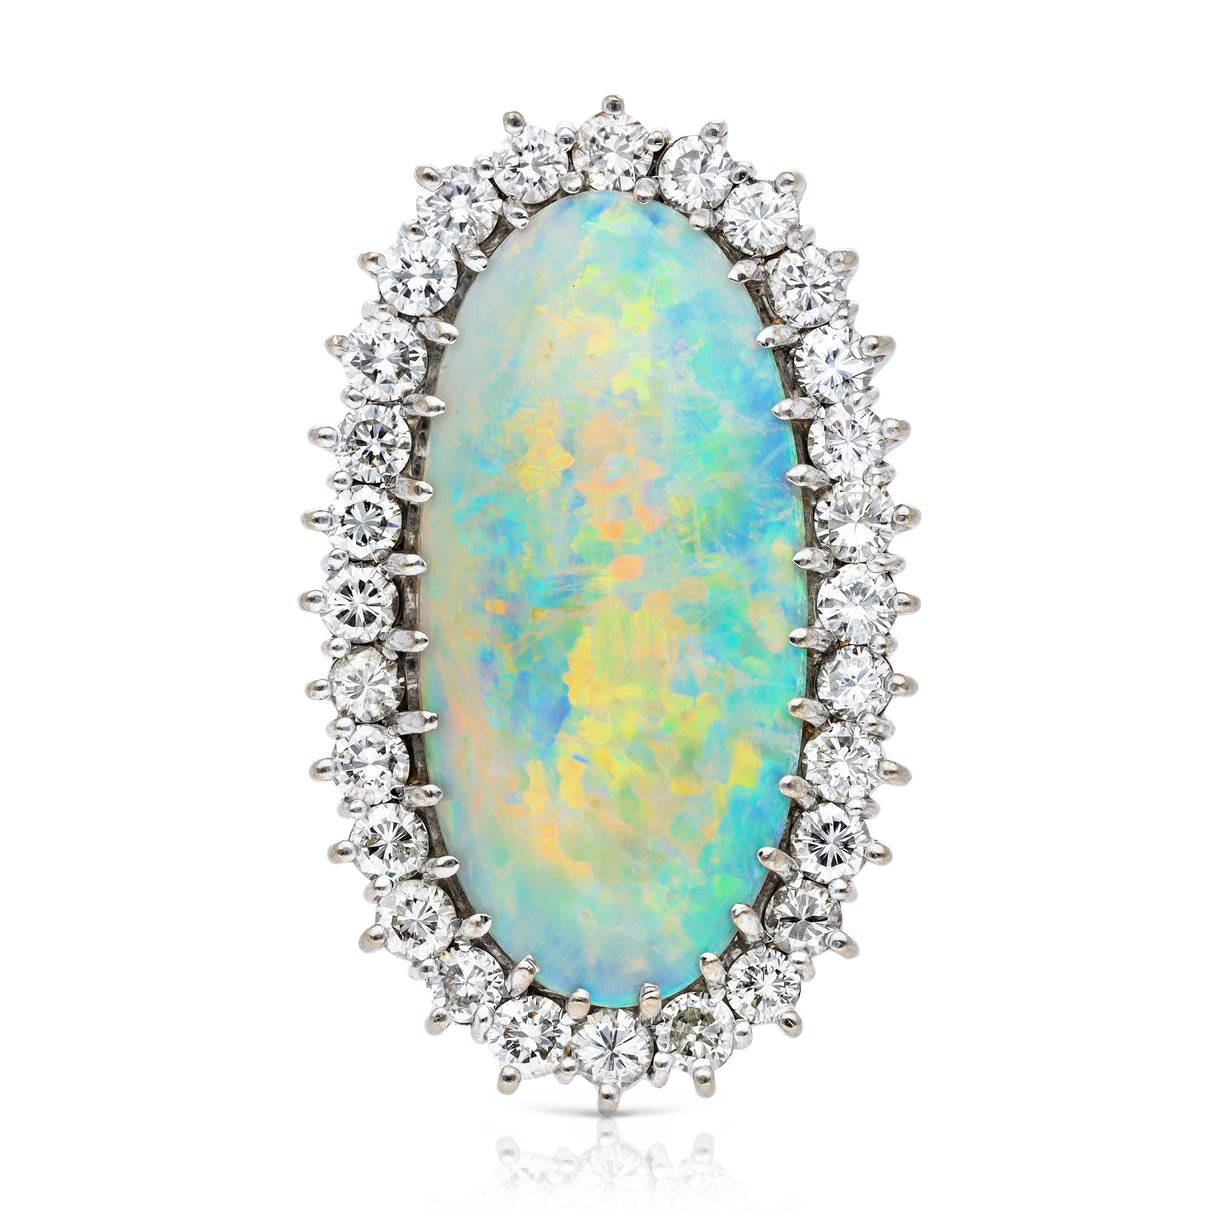 Vintage, 1980s large Australian opal & diamond cluster ring, 18ct yellow gold